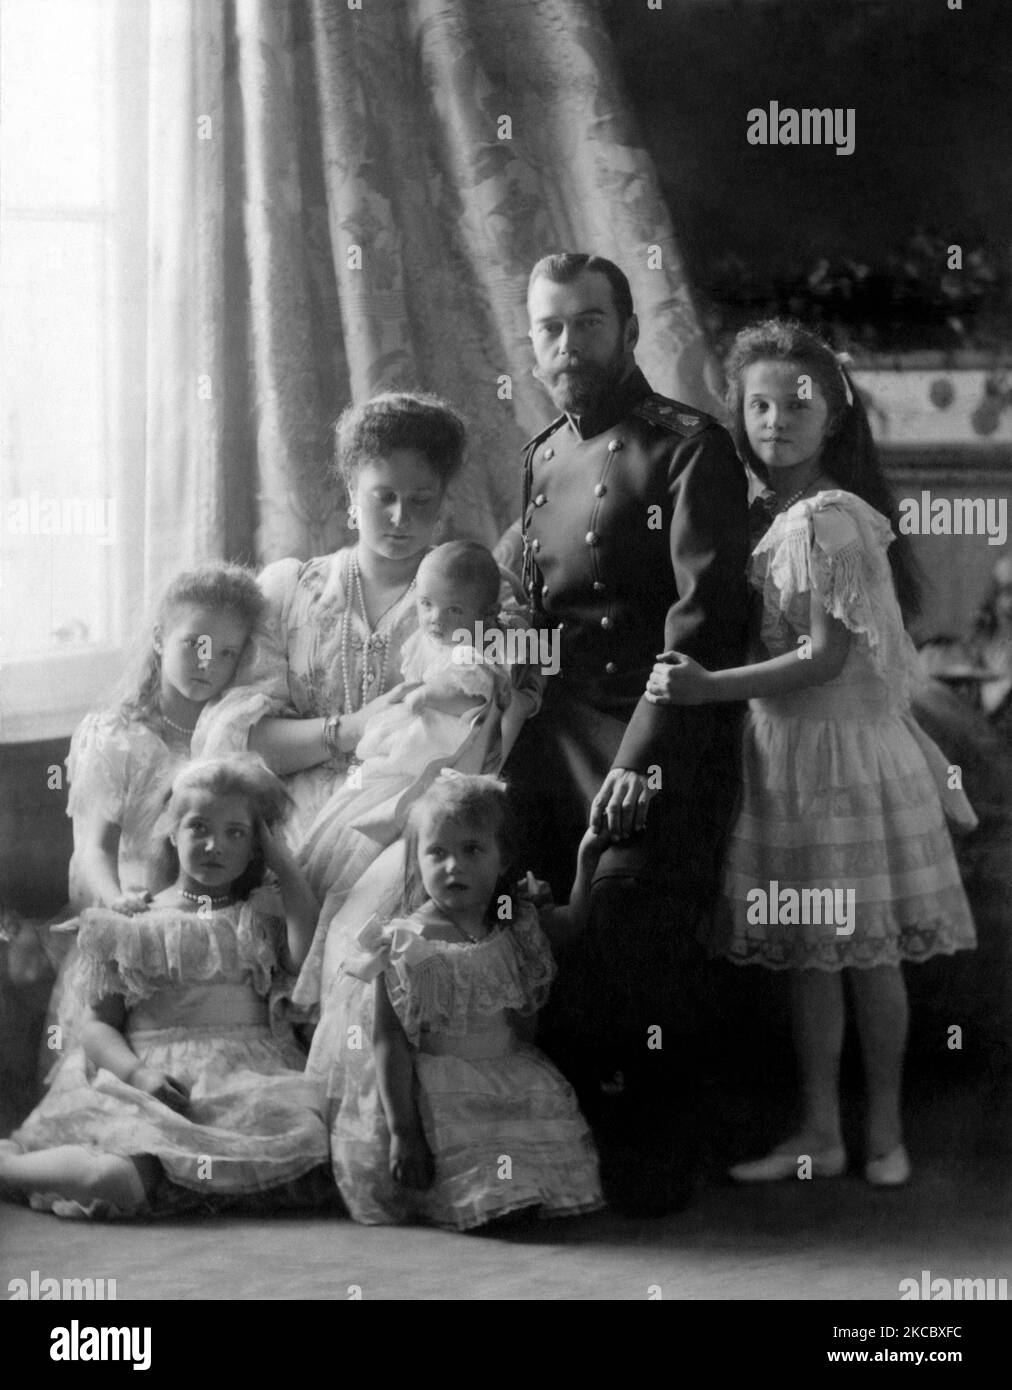 Nicholas II, the last emperor of Russia, posing for a family photo. Stock Photo